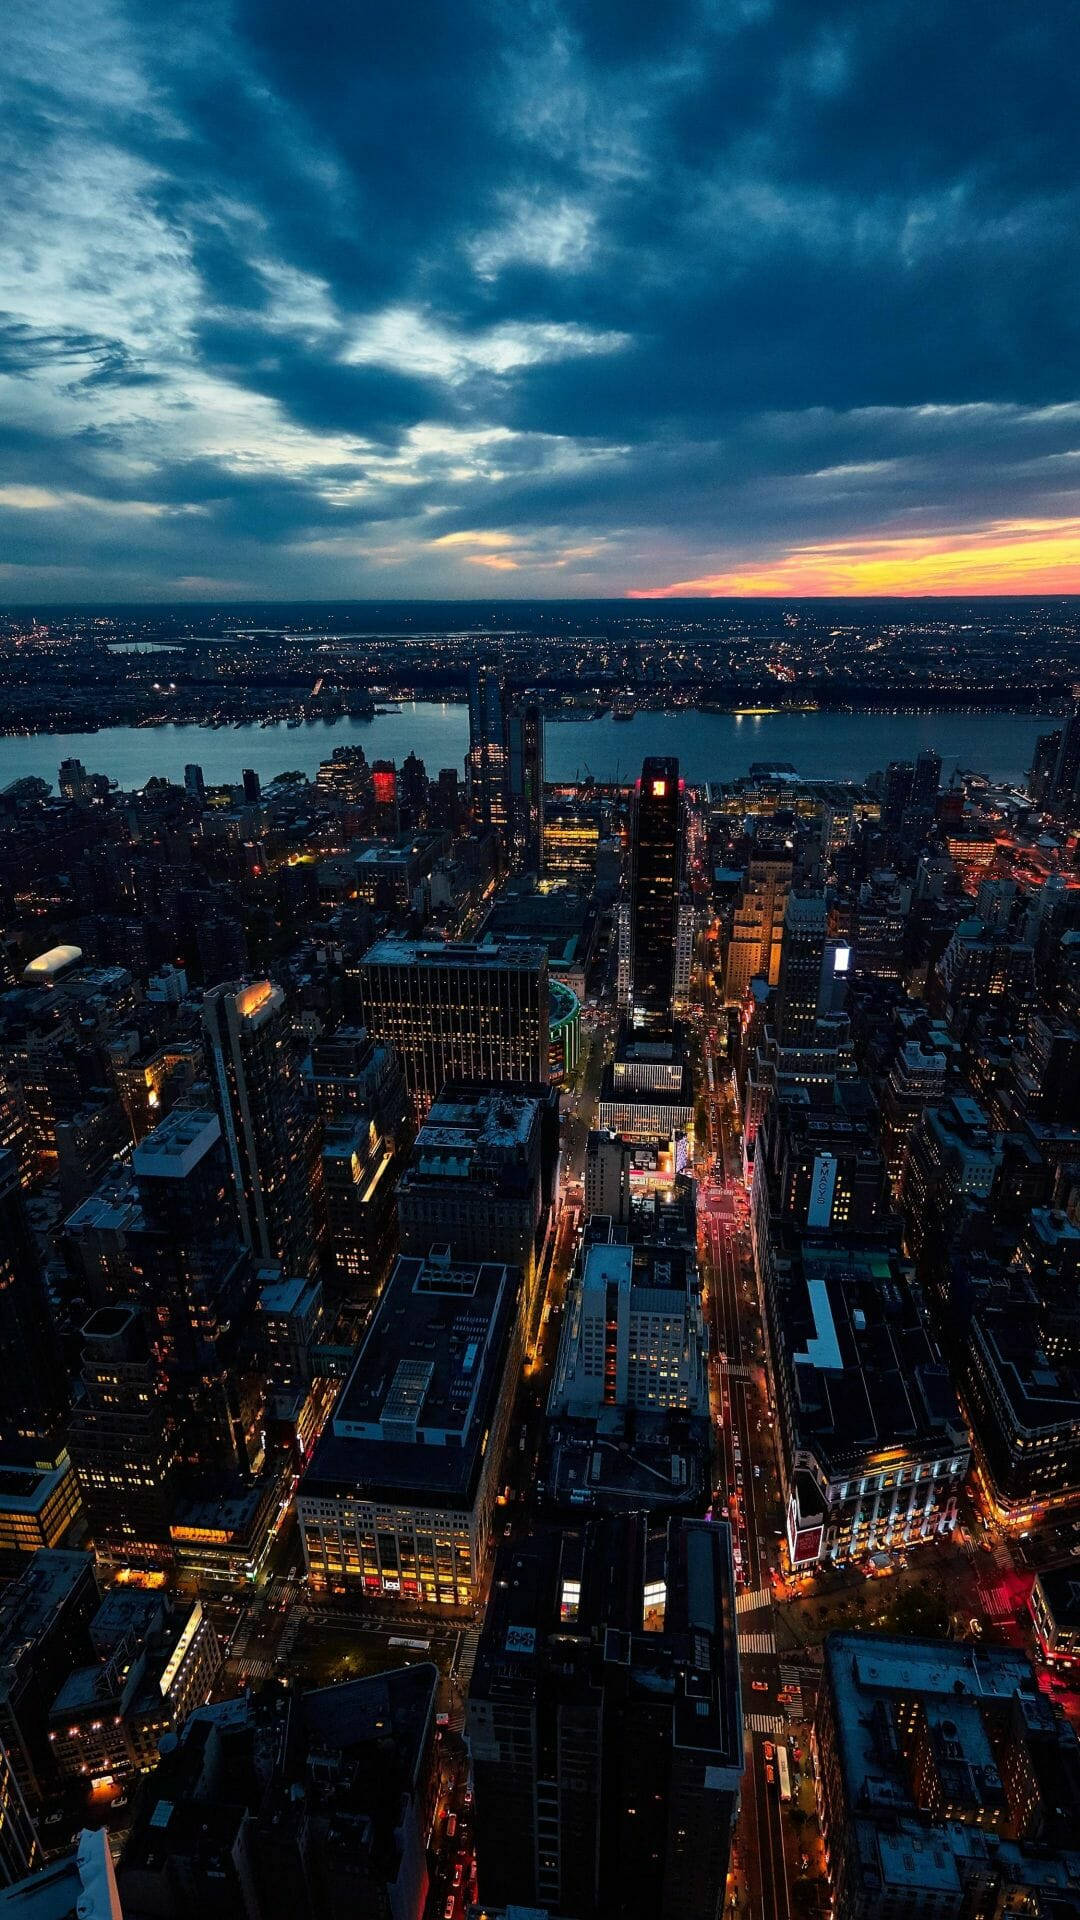 Explore the “Big Apple” through the lens of your iPhone! Wallpaper